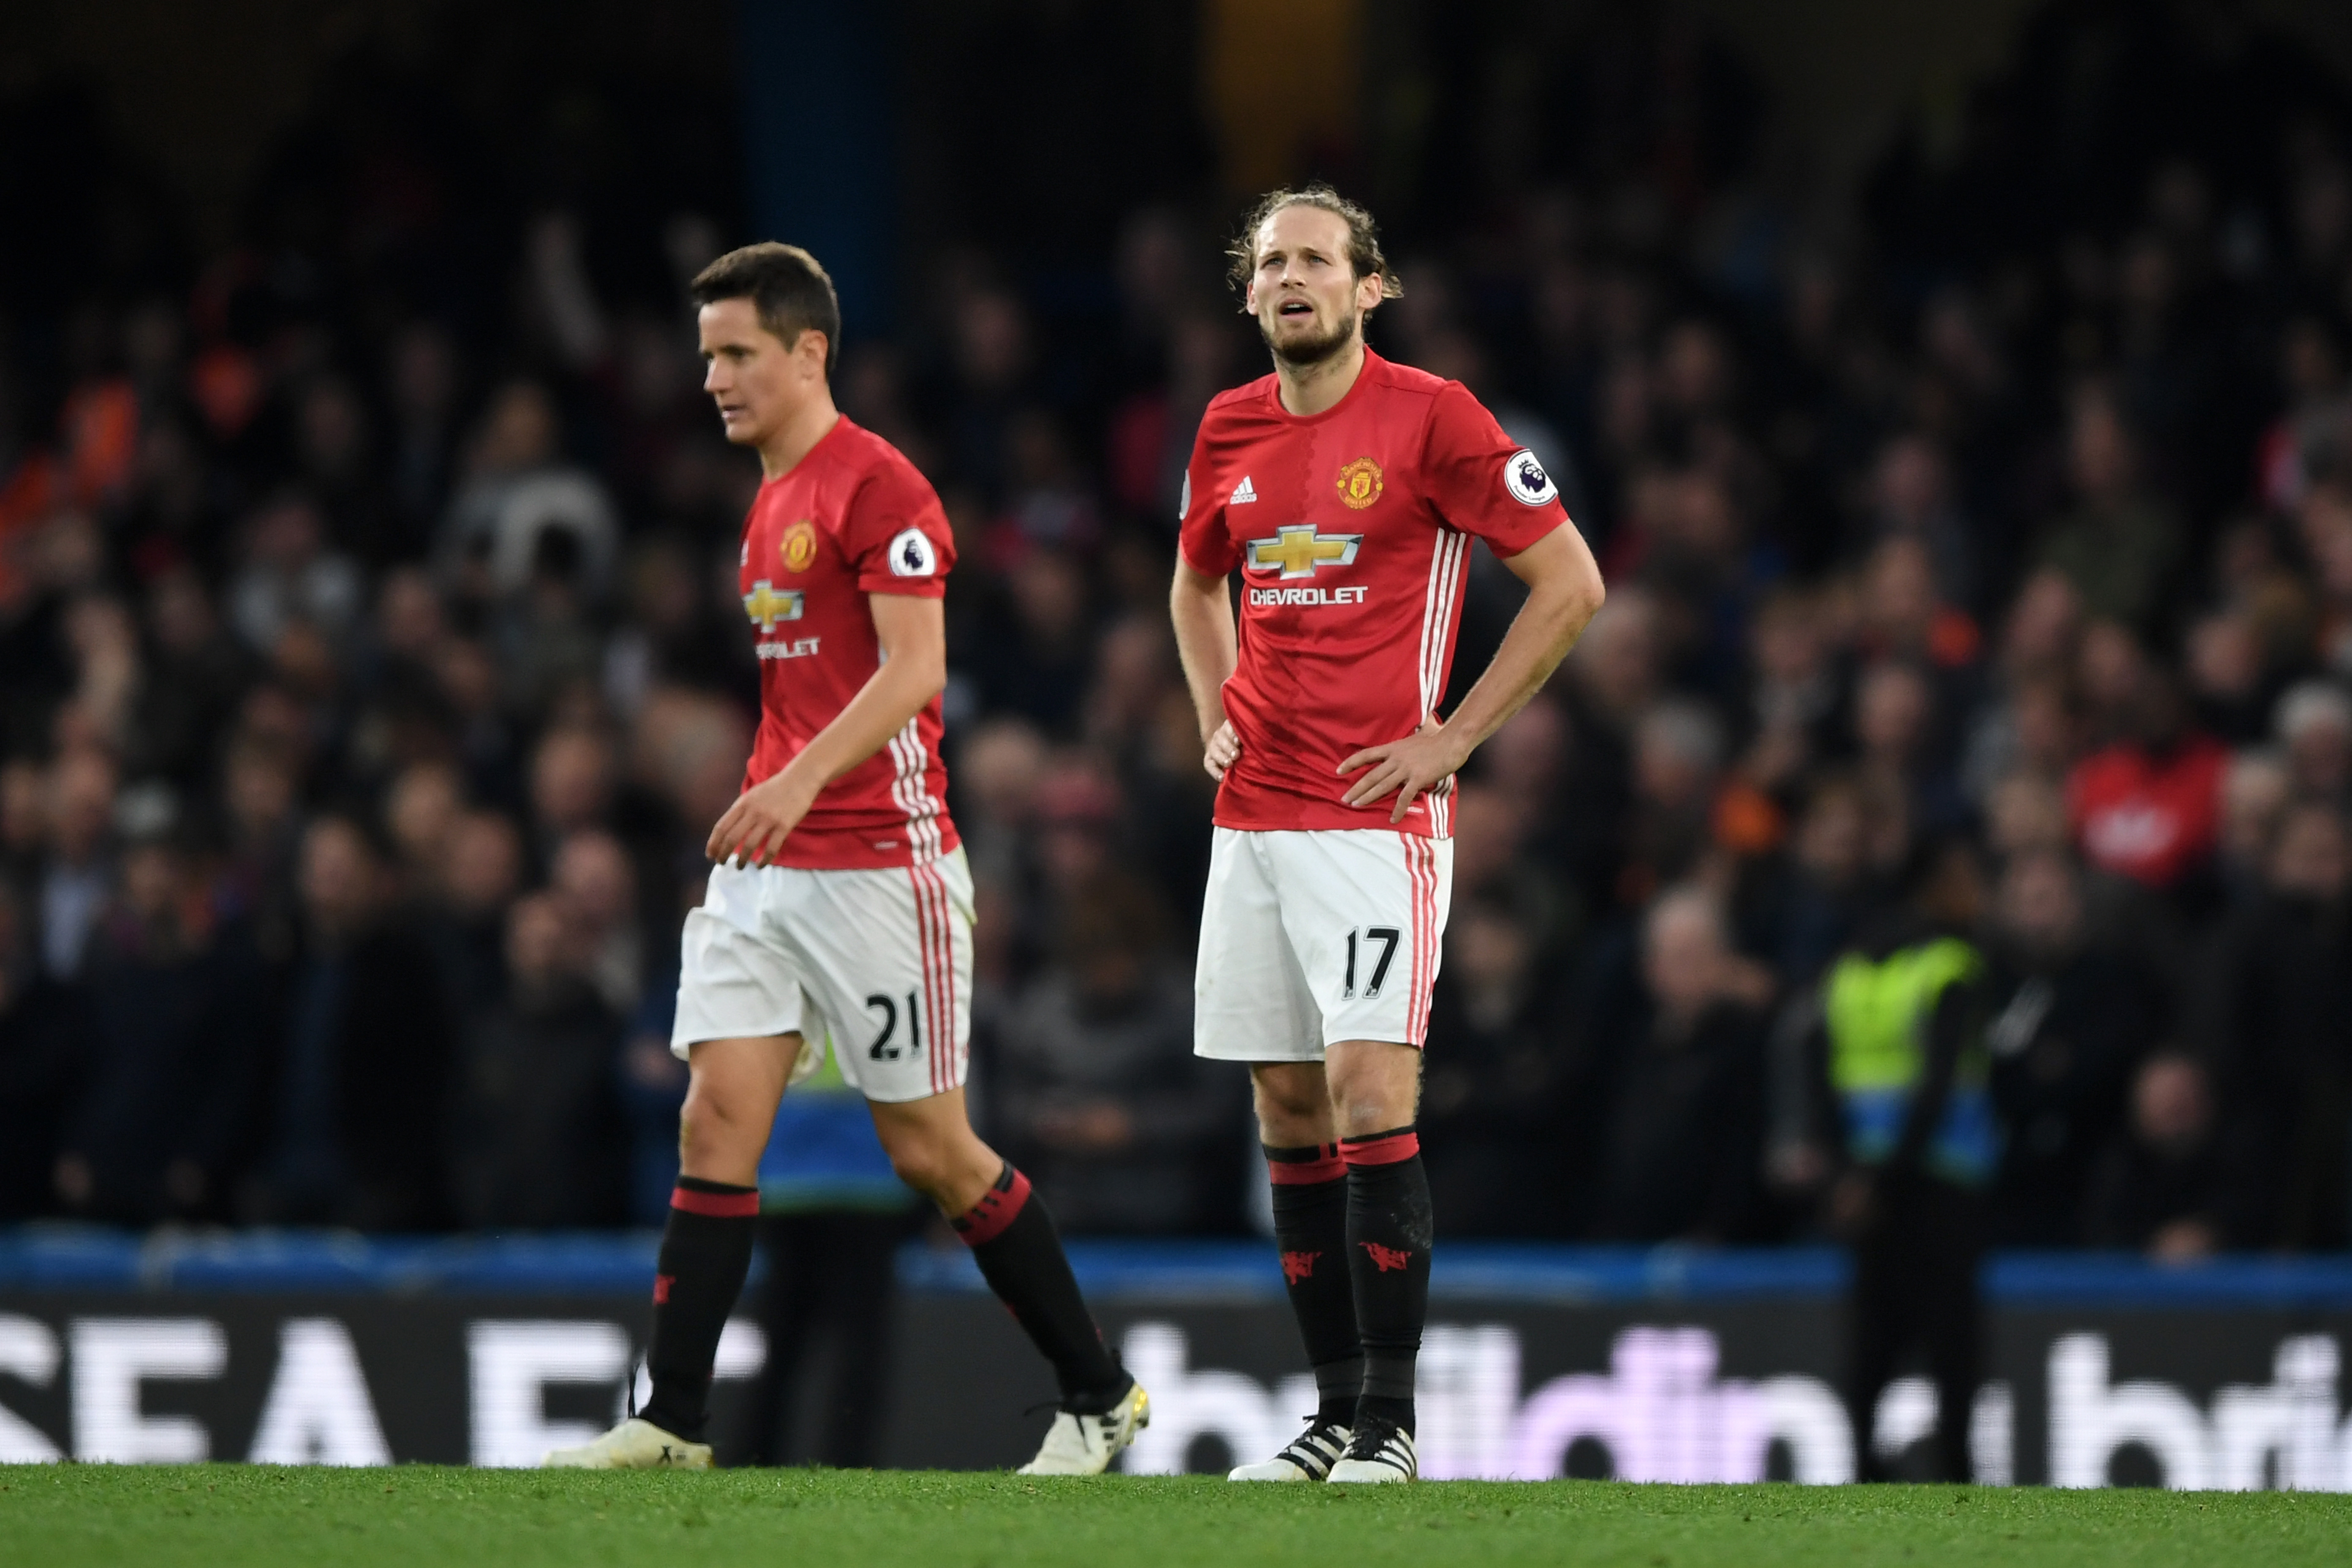 LONDON, ENGLAND - OCTOBER 23:  Daley Blind and Ander Herrera of Manchester United look dejected during the Premier League match between Chelsea and Manchester United at Stamford Bridge on October 23, 2016 in London, England.  (Photo by Shaun Botterill/Getty Images)